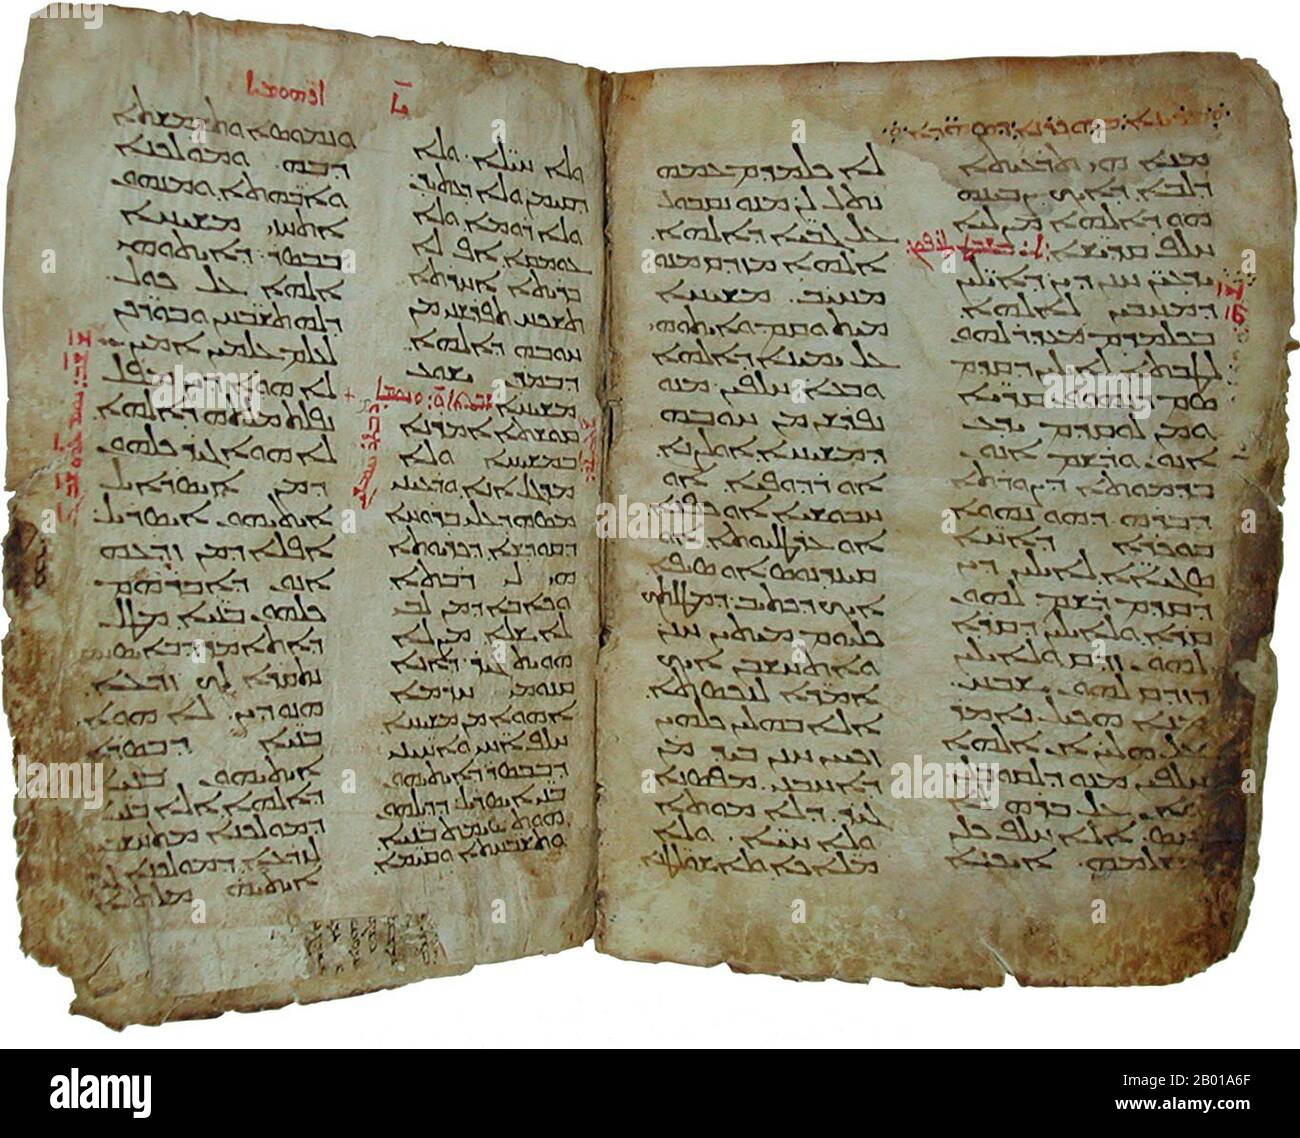 Syria: Nestorian text in Syriac script, late 5th century CE.  Nestorius developed his Christological views as an attempt to rationally explain and understand the incarnation of the divine Logos, the Second Person of the Holy Trinity as the man Jesus Christ. He had studied at the School of Antioch where his mentor had been Theodore of Mopsuestia; Theodore and other Antioch theologians had long taught a literalist interpretation of the Bible and stressed the distinctiveness of the human and divine natures of Jesus. Nestorius took his Antiochene leanings with him when he was appointed Patriarch. Stock Photo